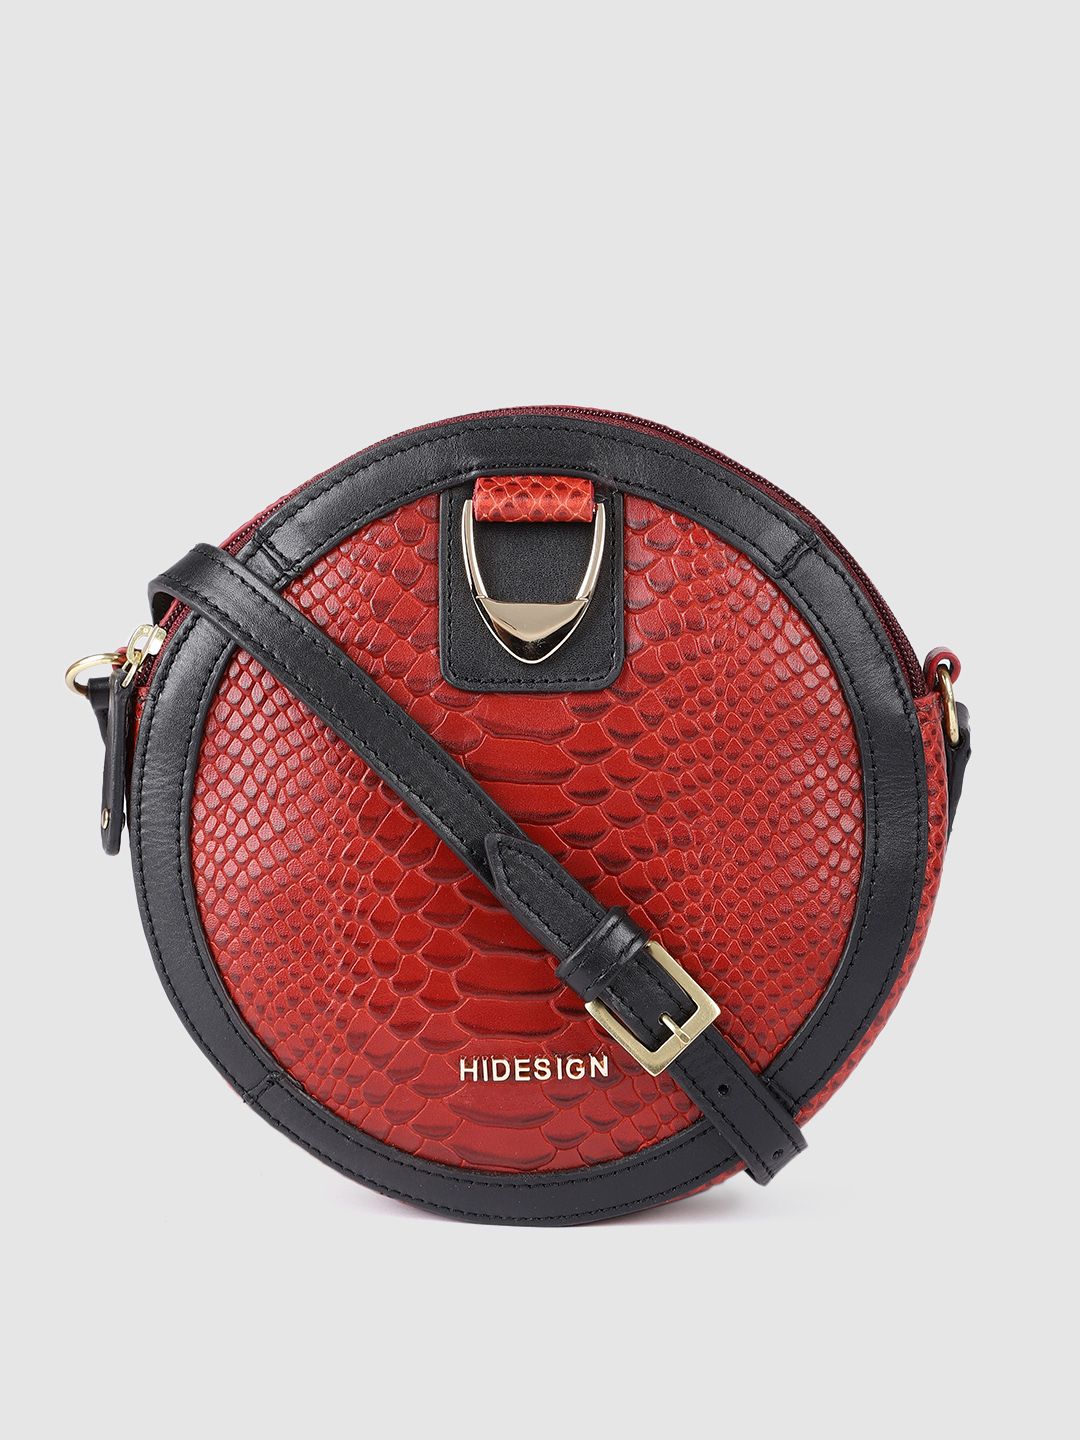 Hidesign Red Textured Leather Structured Sling Bag Price in India